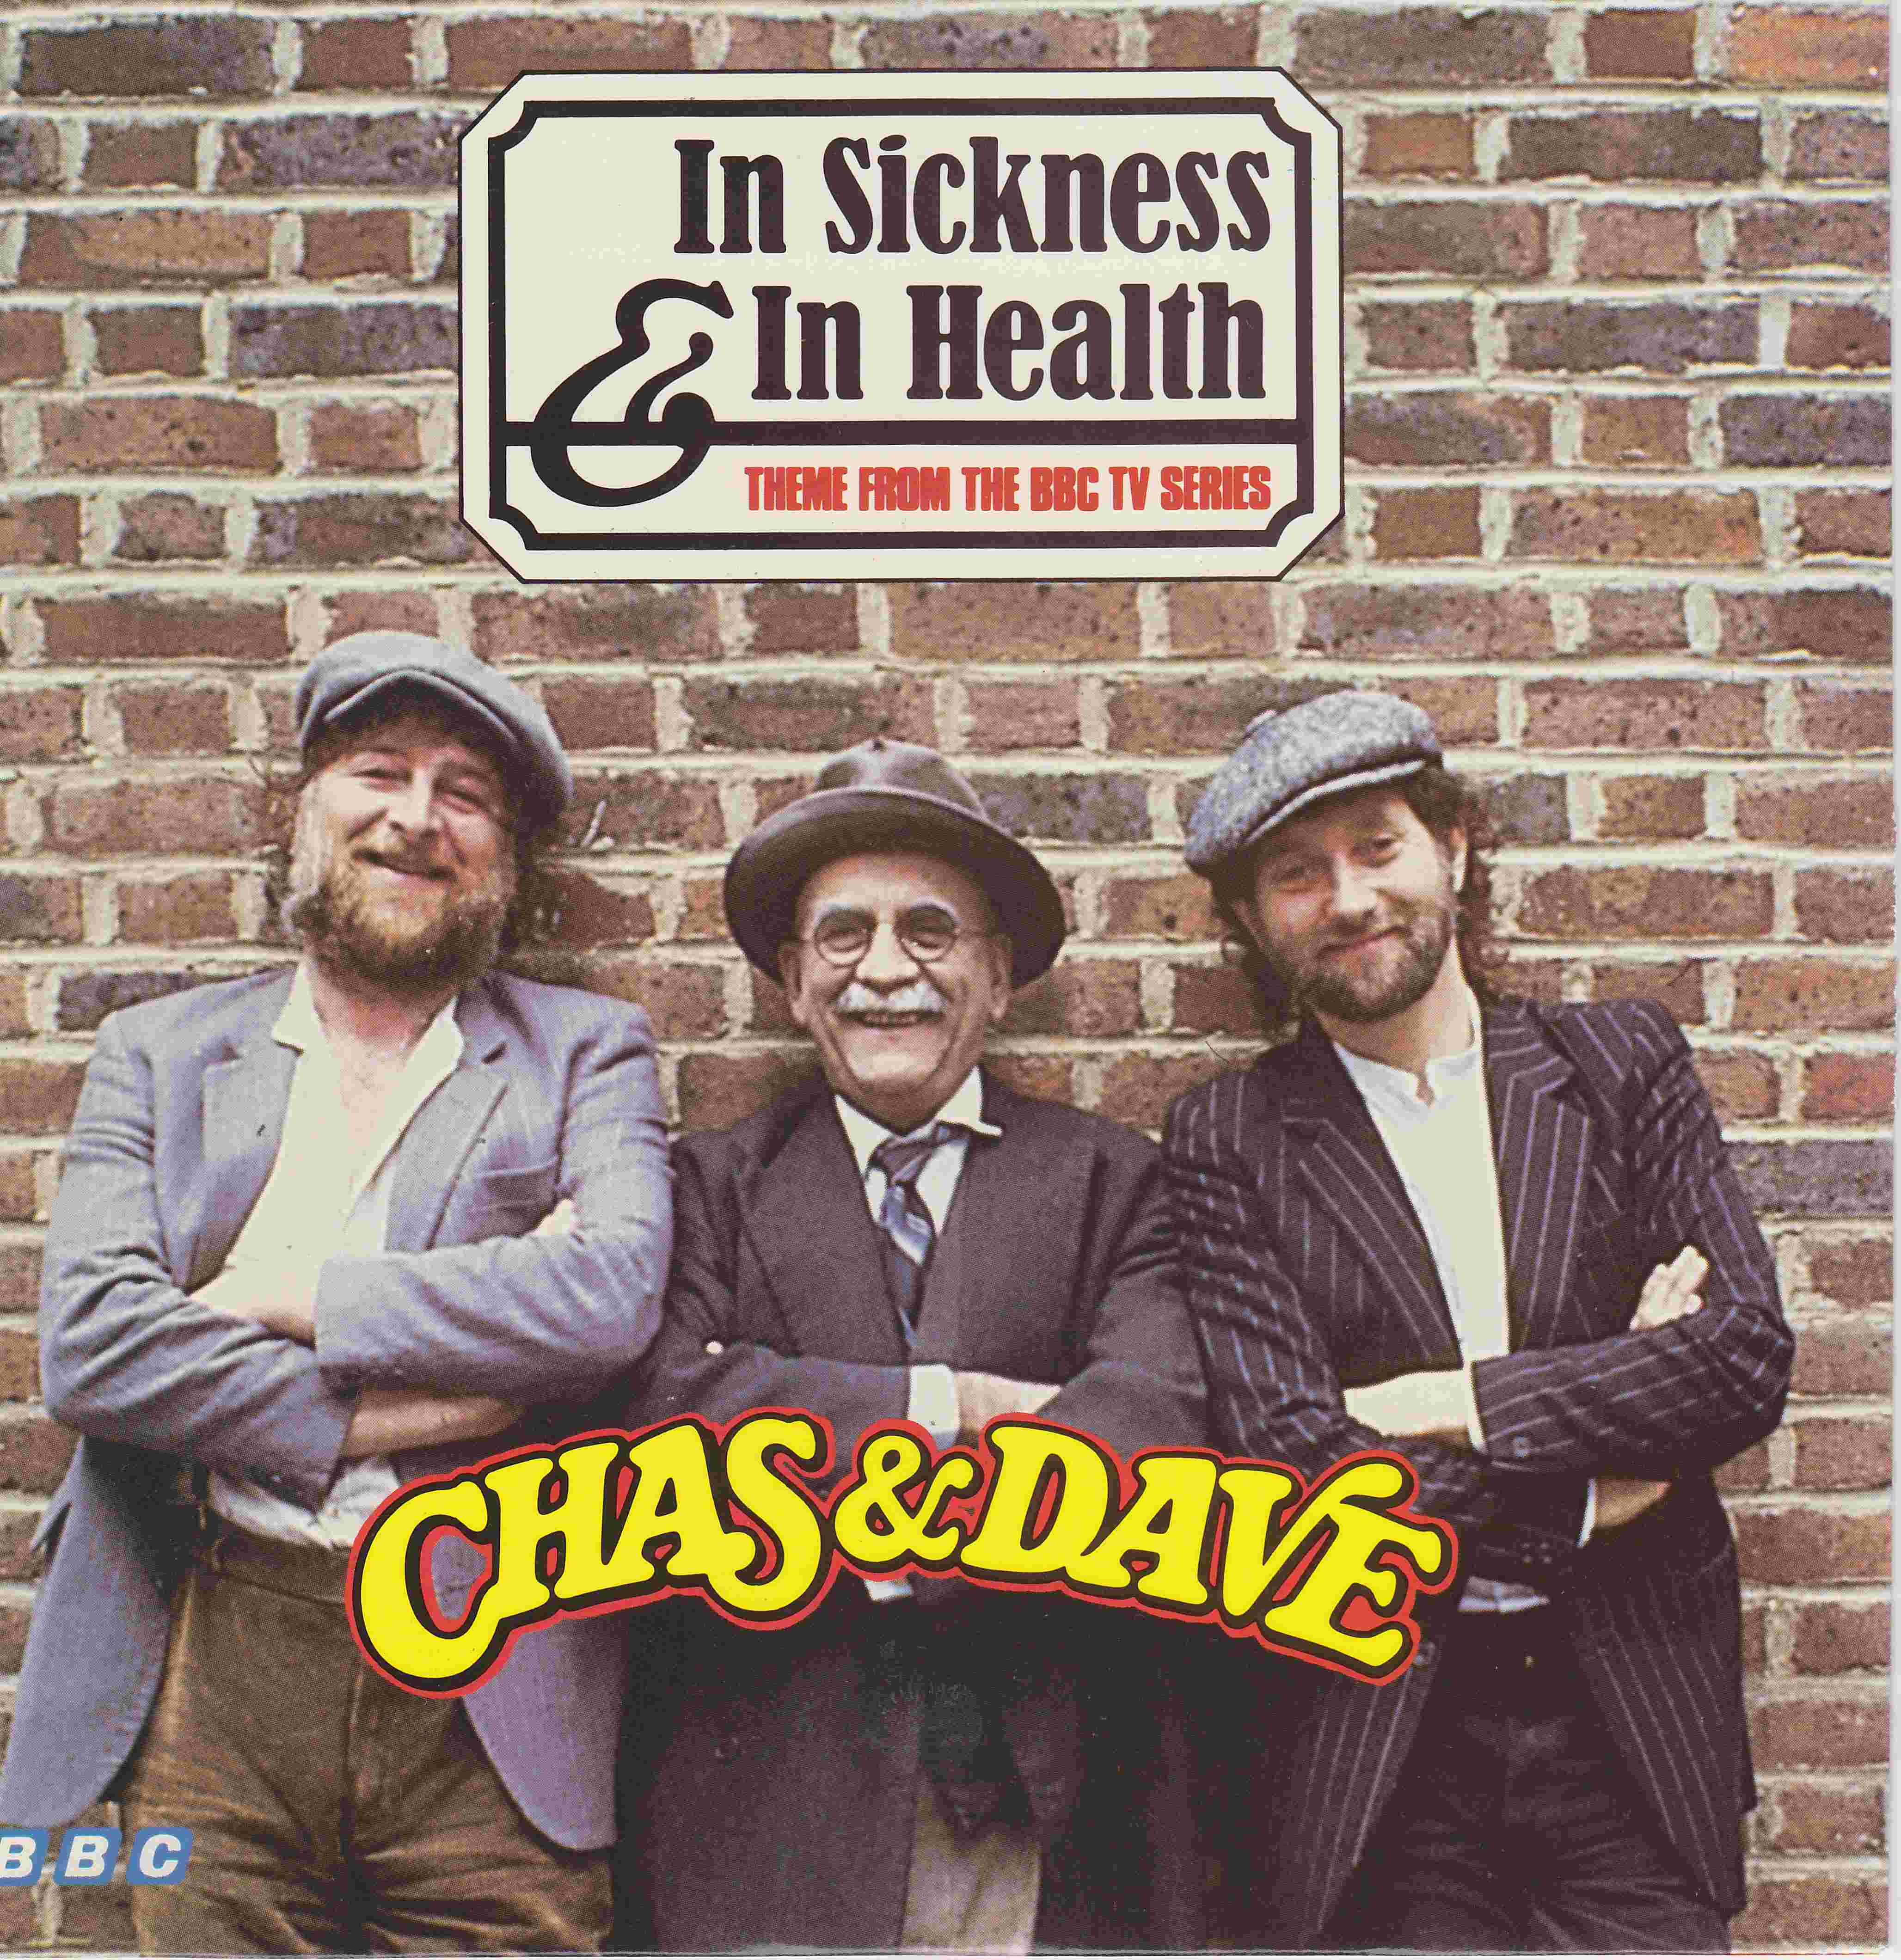 Picture of RESL 176 In sickness and in health by artist Chas 'n' Dave from the BBC records and Tapes library